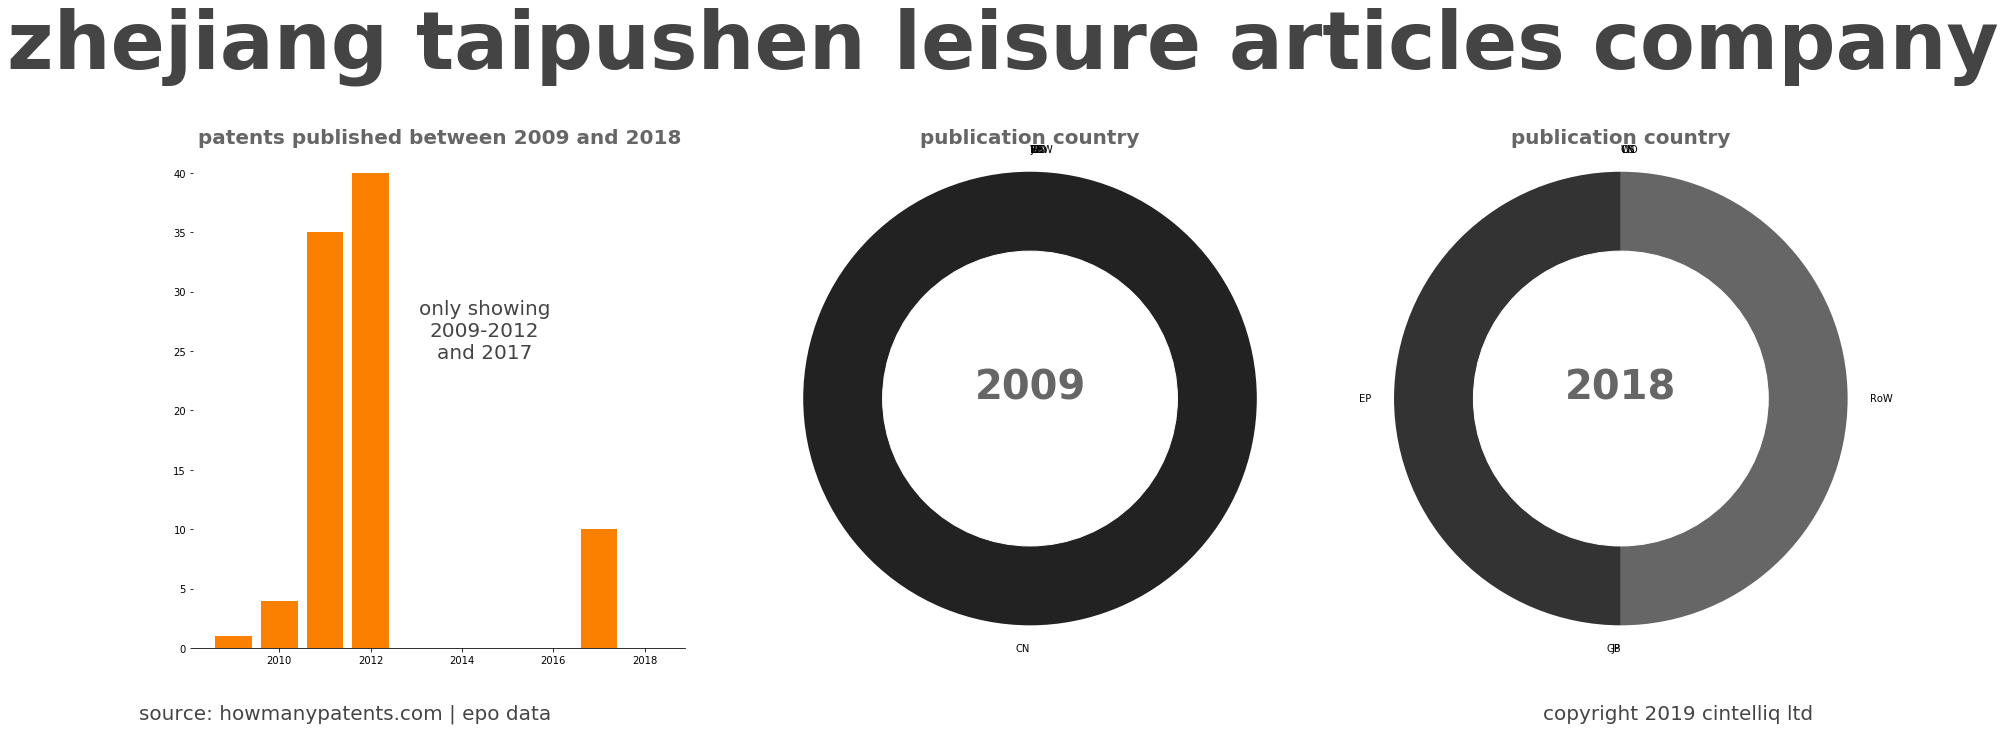 summary of patents for Zhejiang Taipushen Leisure Articles Company